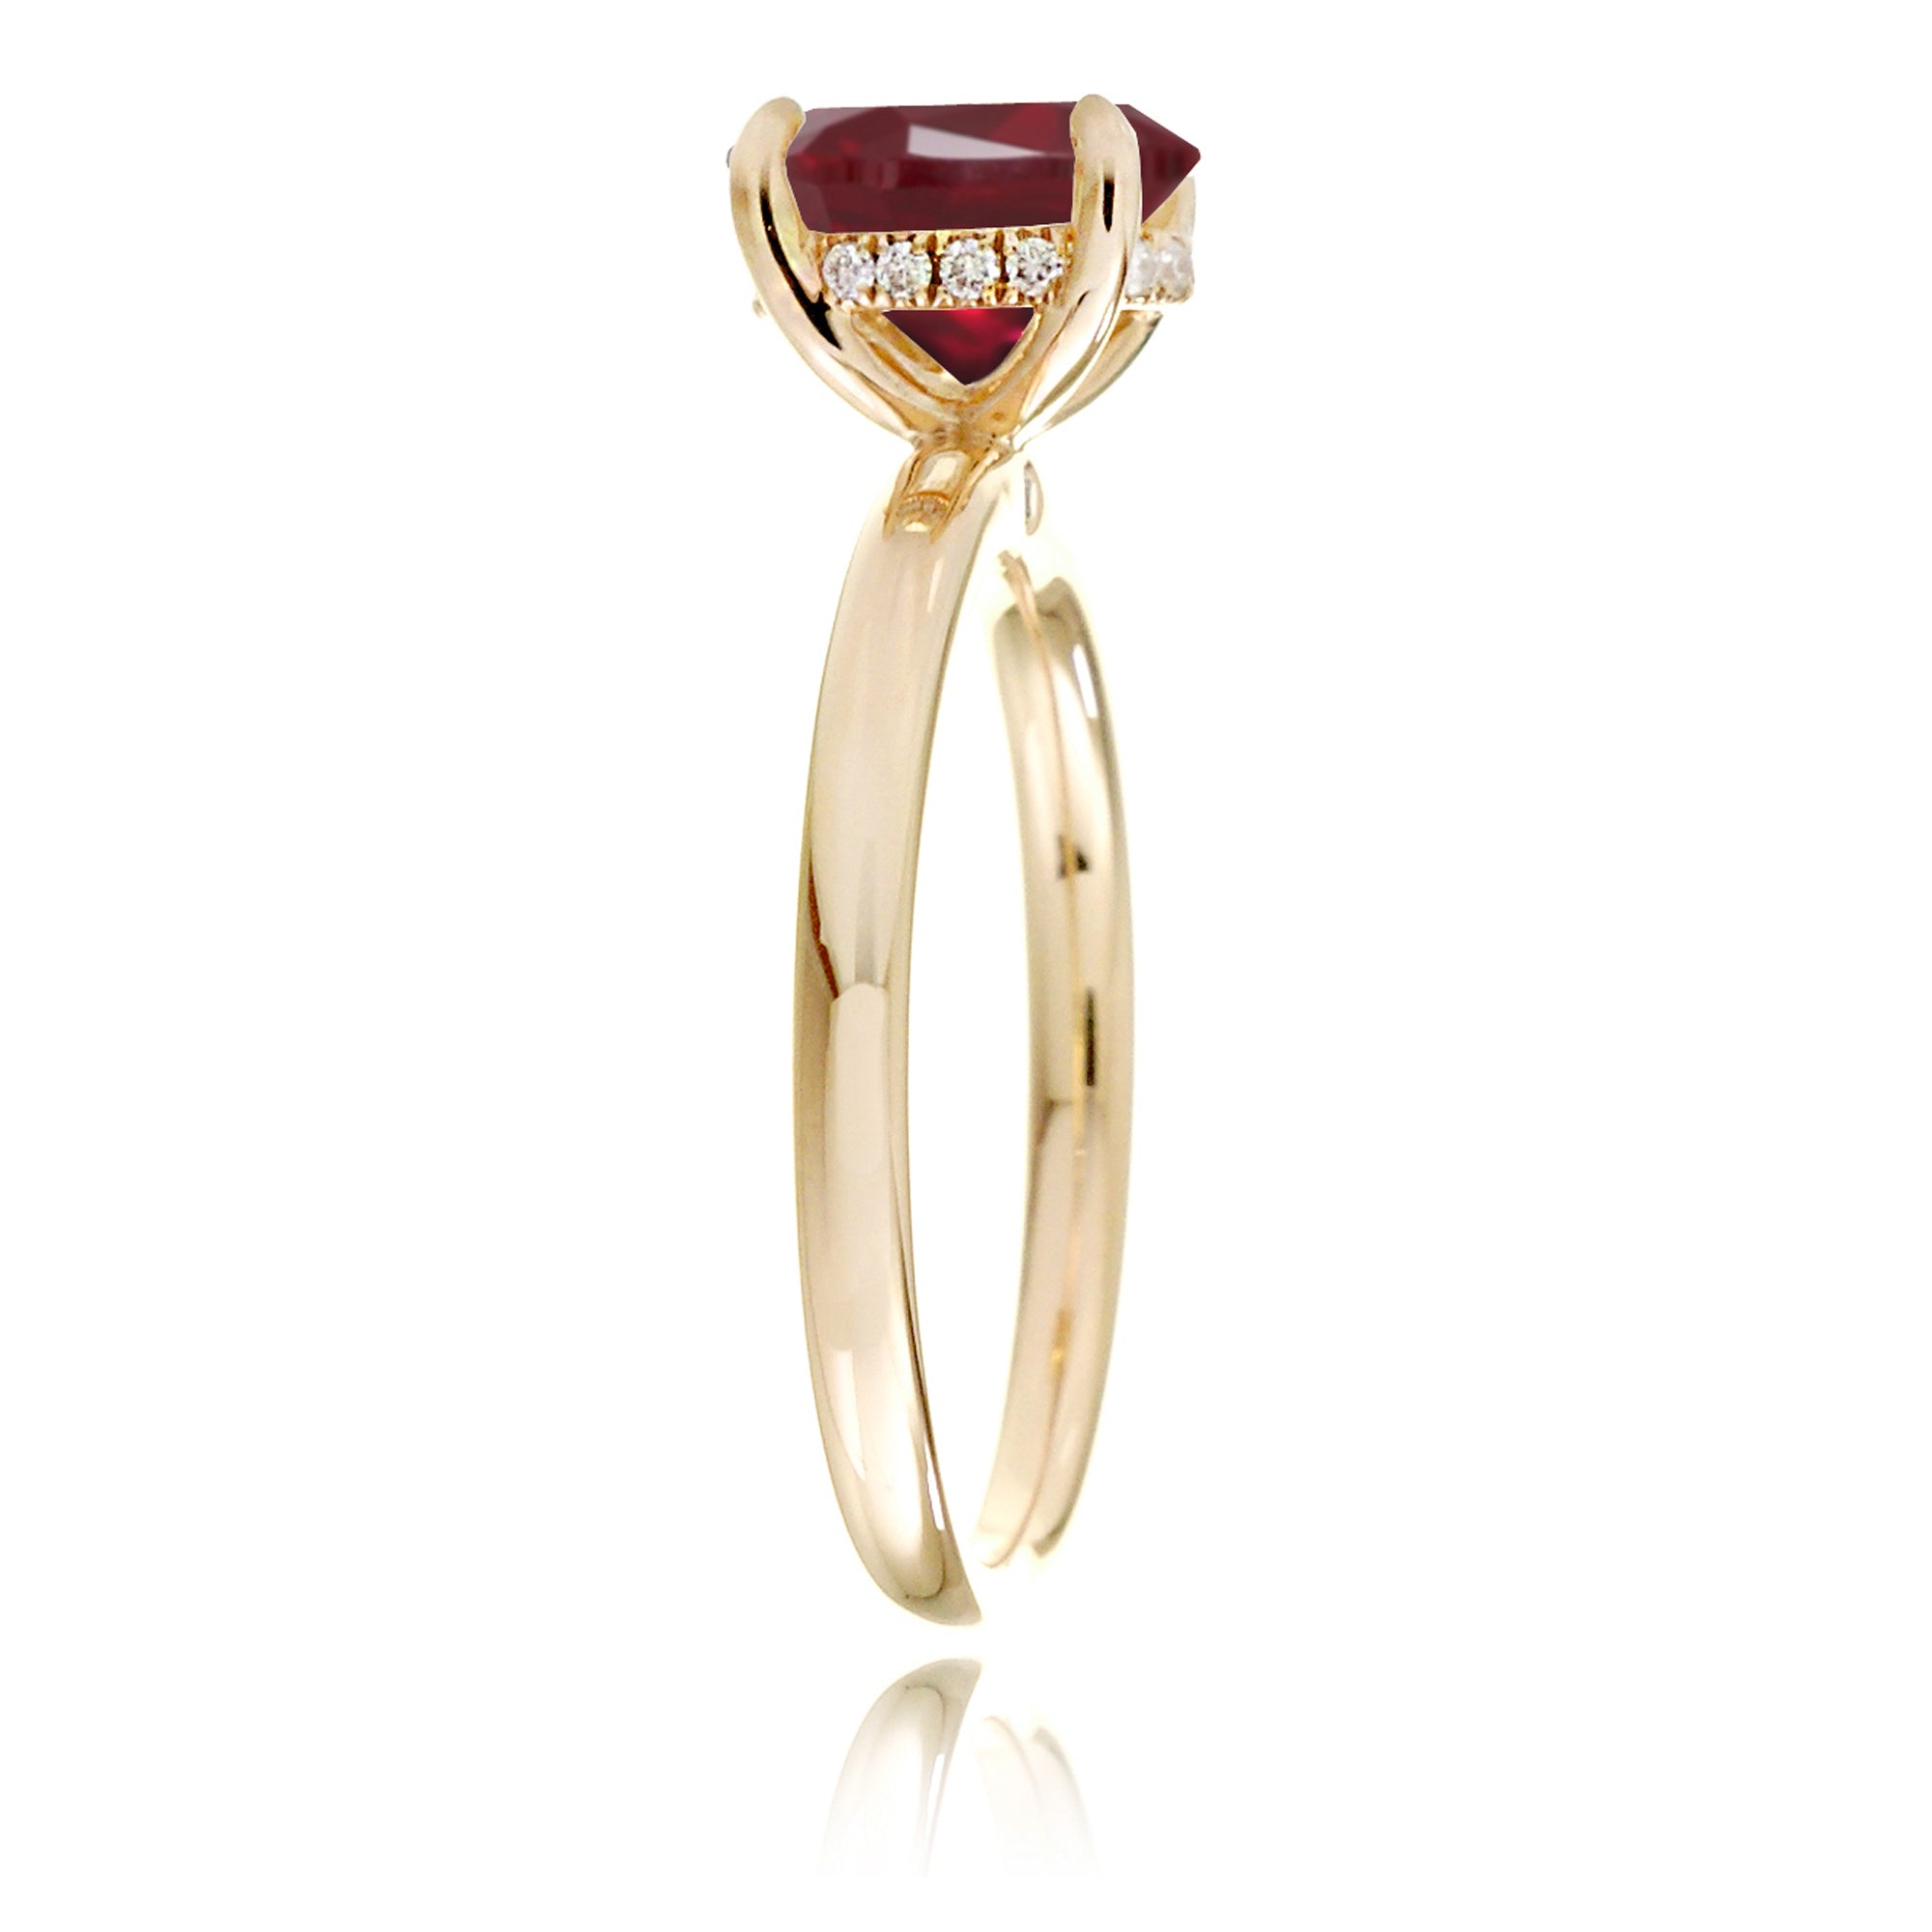 Oval ruby ring diamond hidden halo and solid polish rounded band in yellow gold